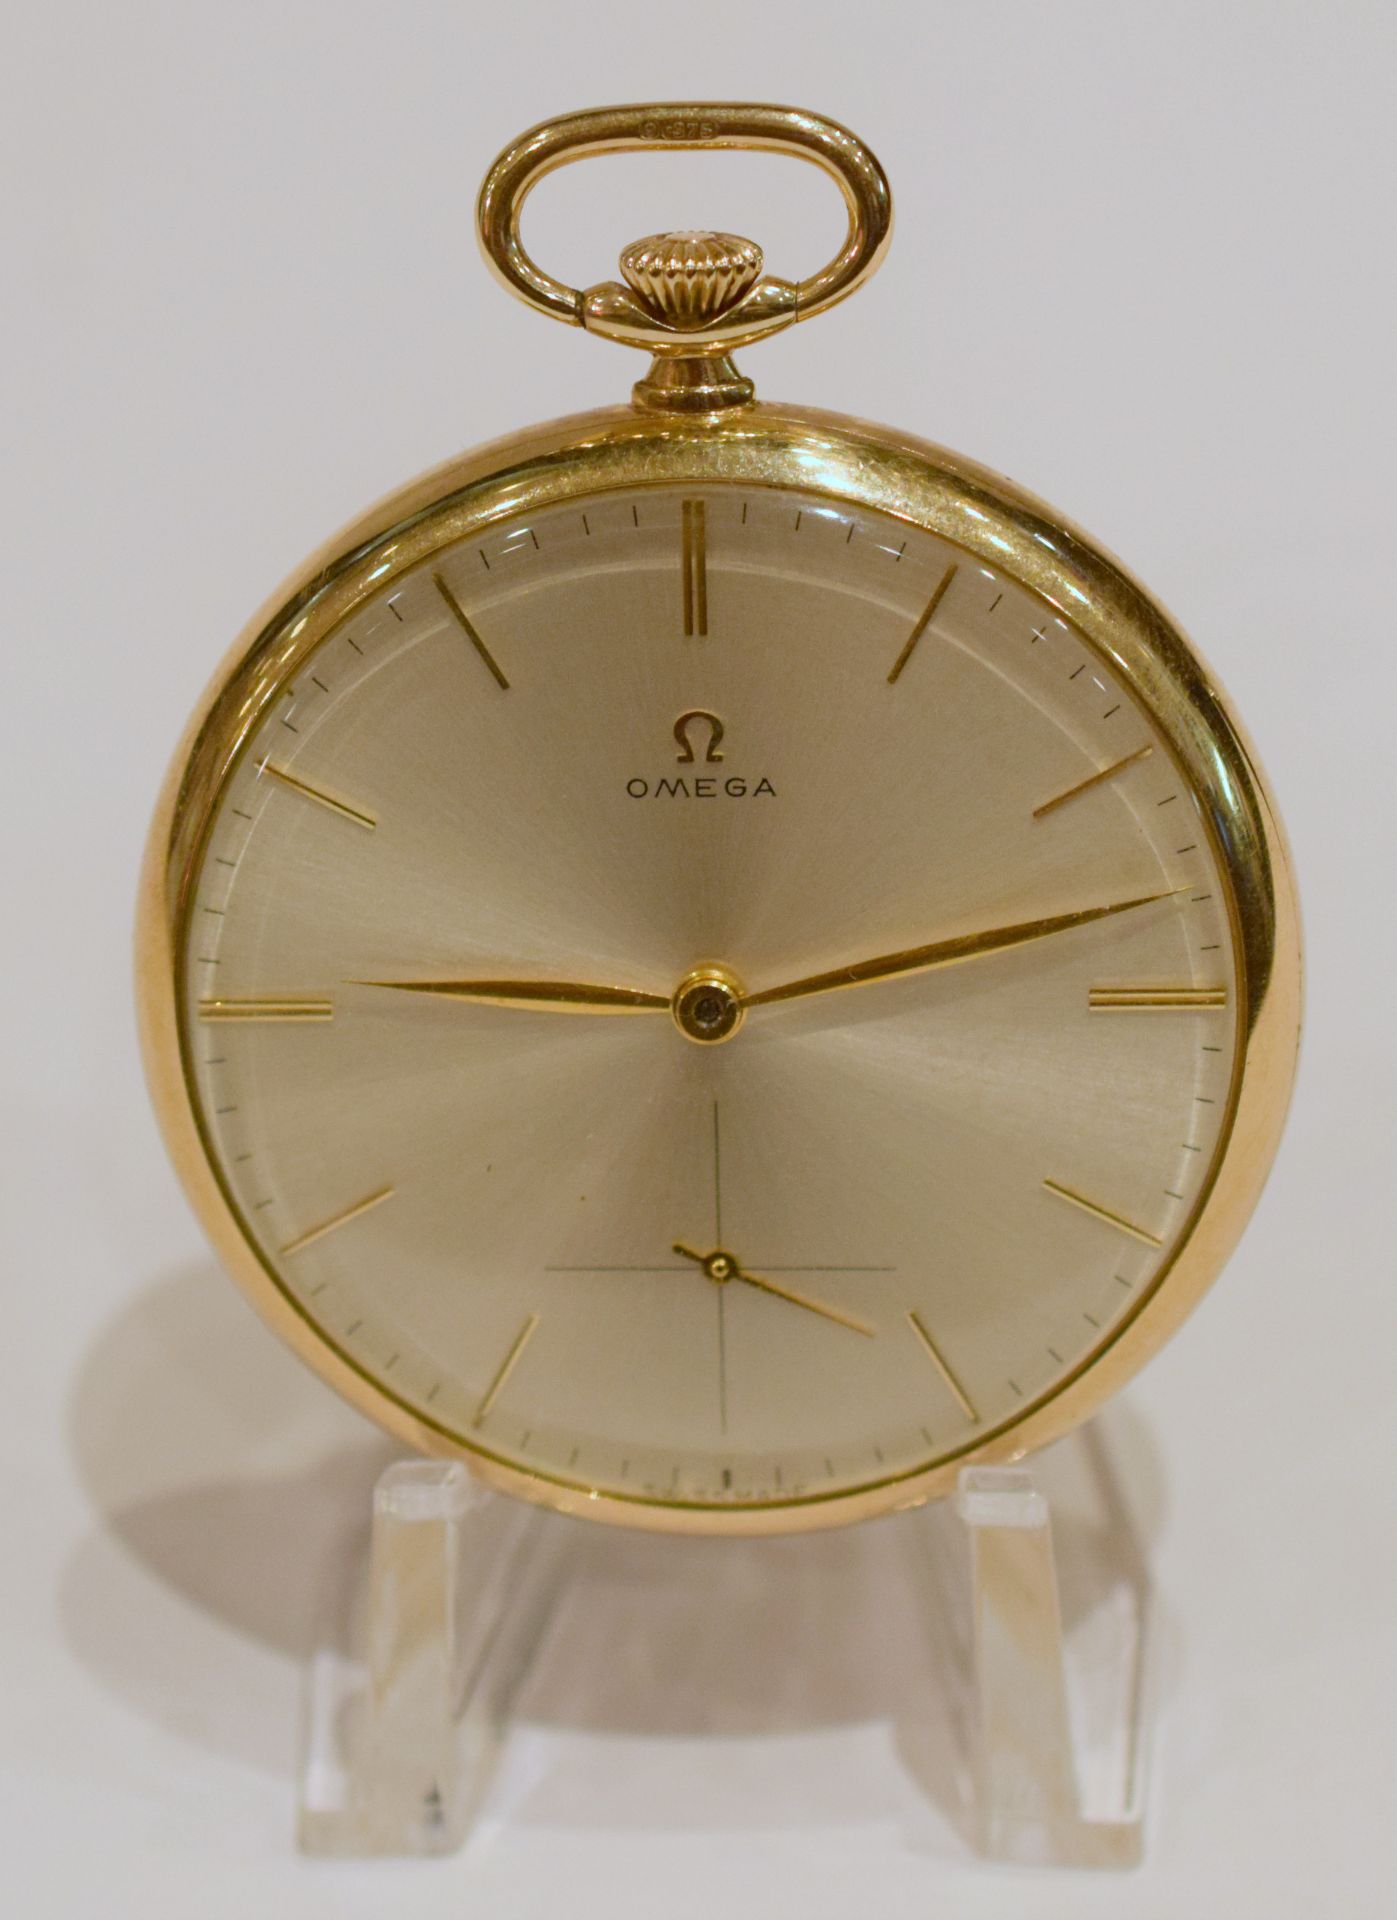 Omega 9ct Gold Open Face Pocket Watch Excellent Condition - Image 5 of 8